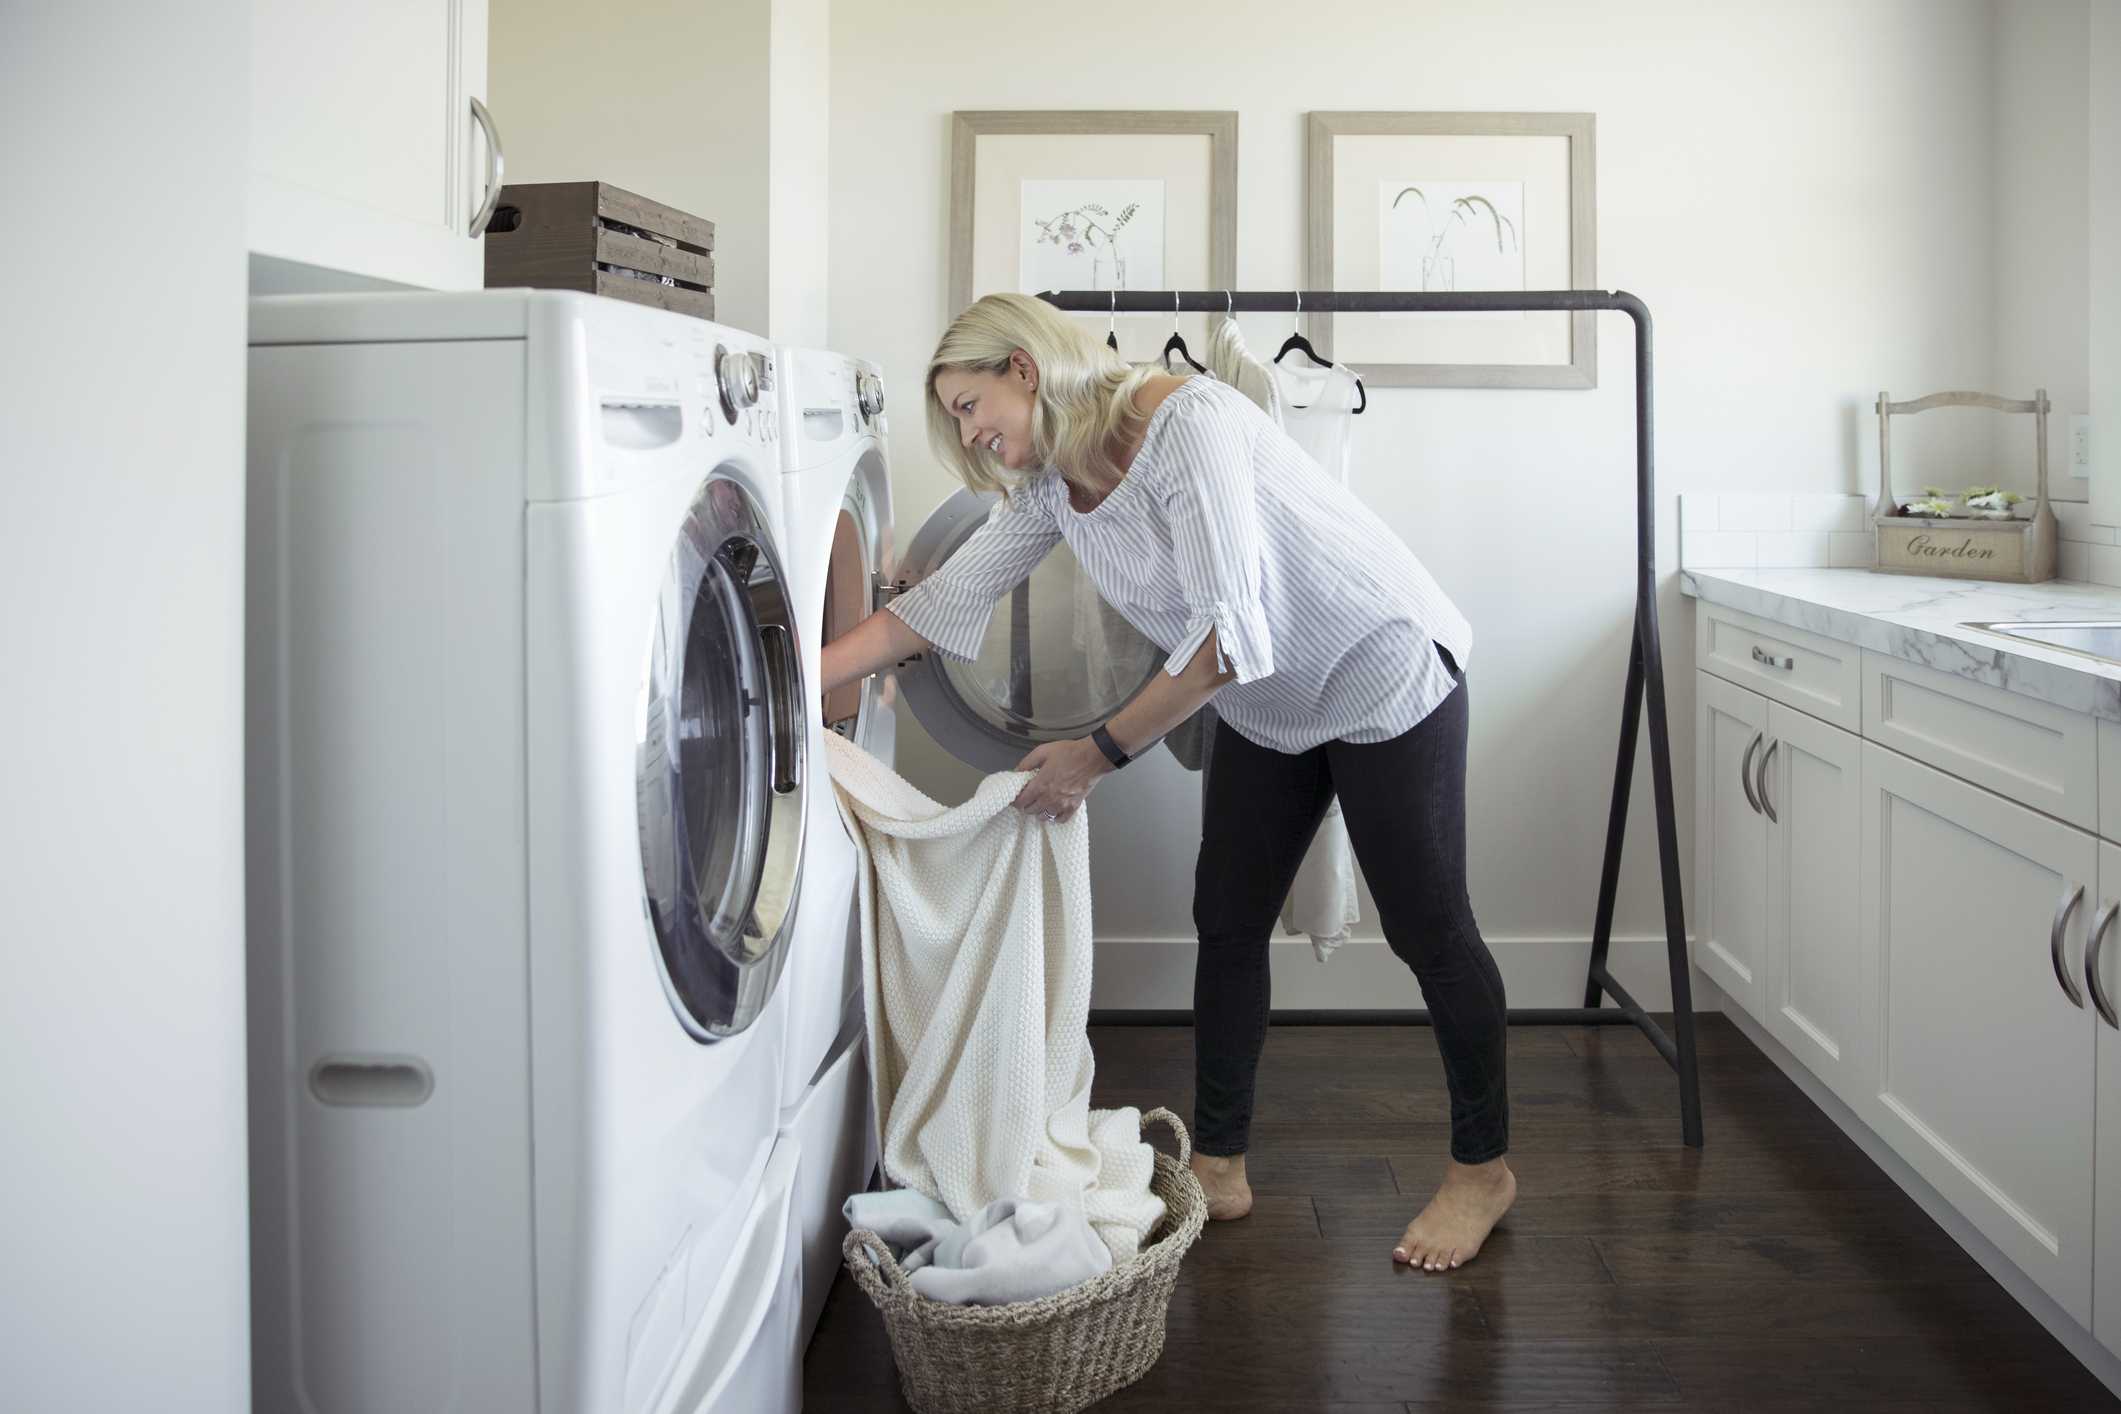 woman-removing-laundry-from-dryer-in-laundry-room-royalty-free-image-915093676-1556661060